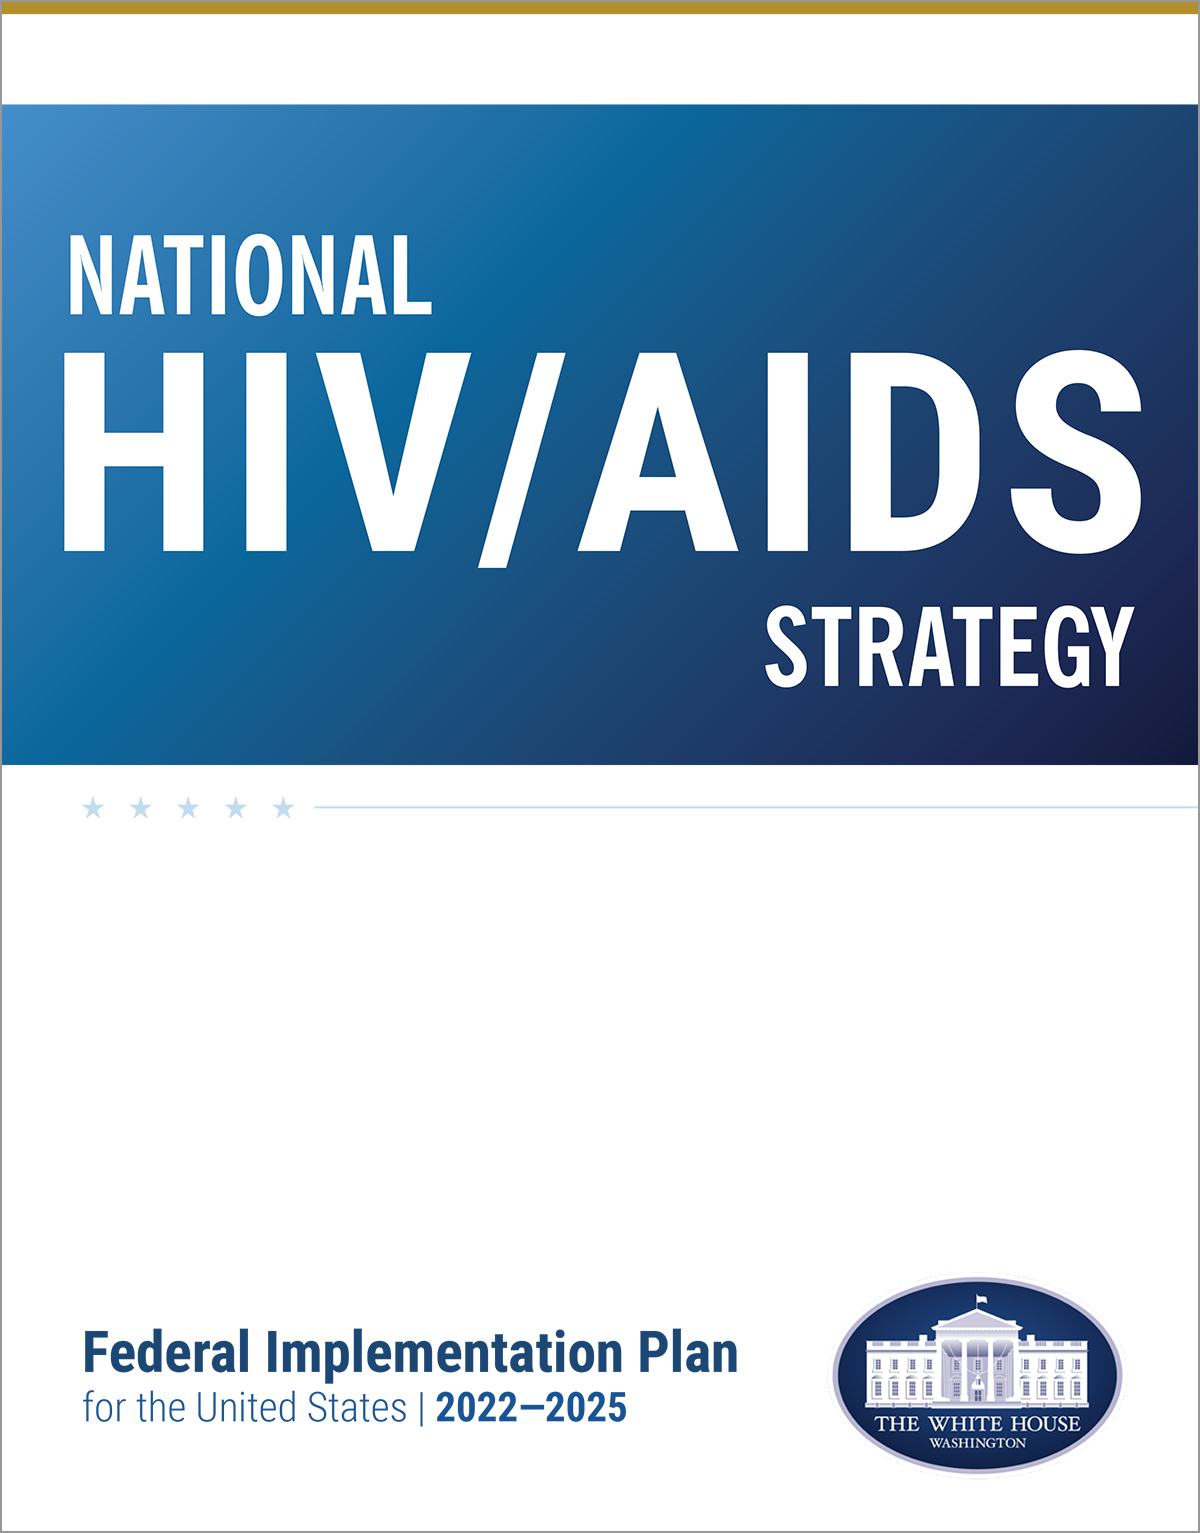 This Implementation Plan outlines federal partners’ commitments to policies, research, and activities during fiscal years 2022–2025 to meet the goals of the National HIV/AIDS Strategy.